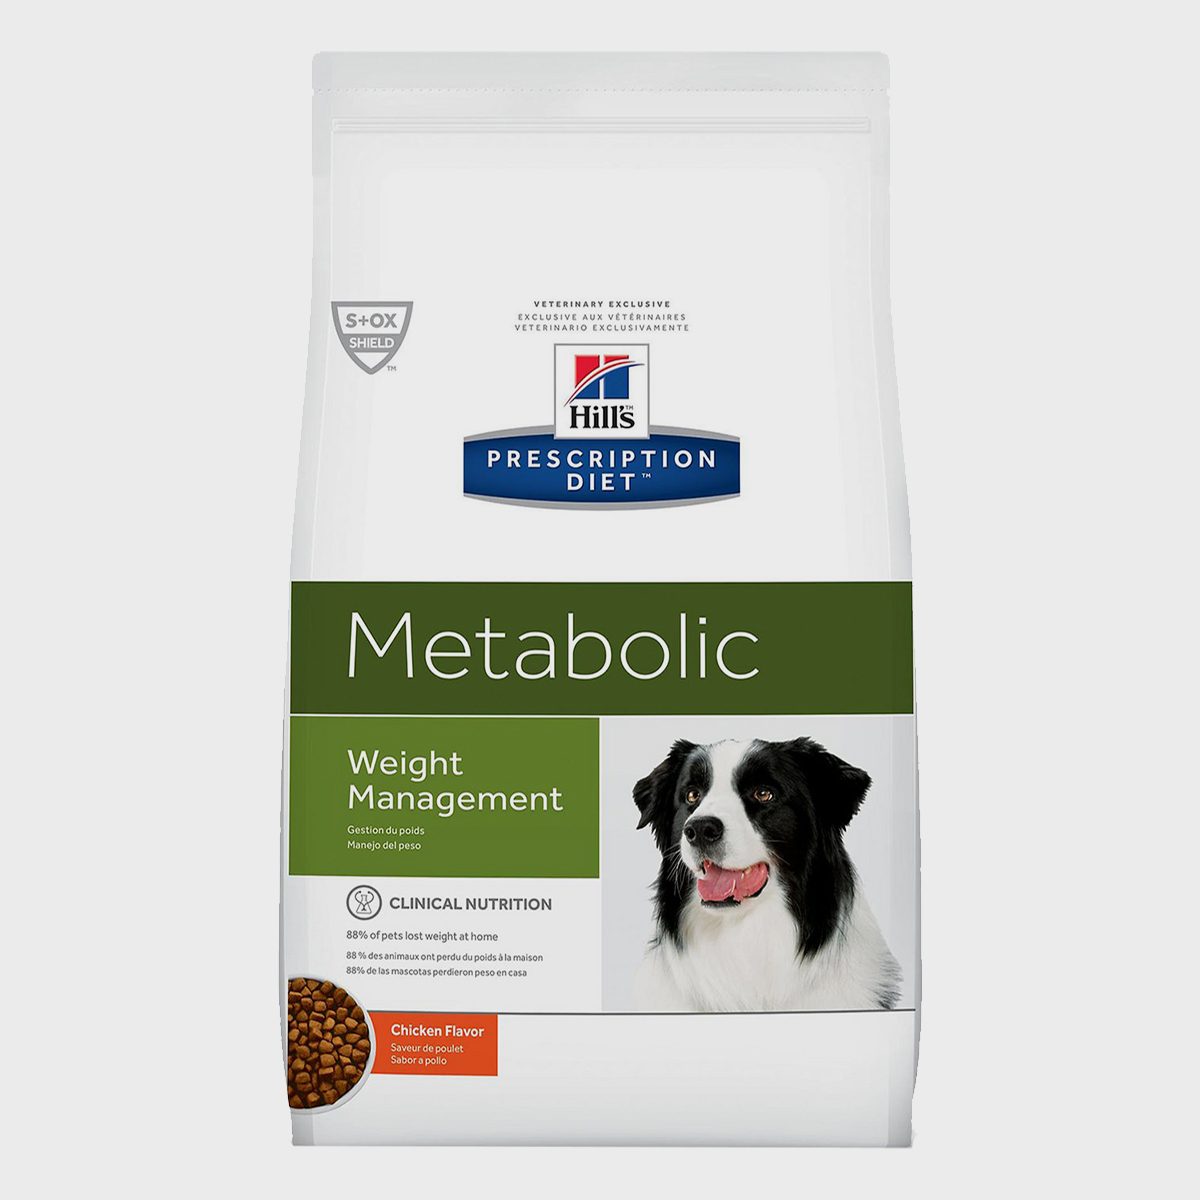 <p>If your dog has put on a few extra pounds and you're concerned about his health, Dr. Burch recommends changing his diet to one with fewer calories and an extra dose of fiber from fruits and veggies. This Hill's Prescription Diet Metabolic formulation will do the trick. "It has a proprietary blend of fiber, which helps keep dogs feel full and satisfied long to prevent overeating," she says, noting that the blend includes pea fiber, dried beet pulp, dried tomato pomace, and flaxseed. "Its formula also helps to improve a dog's ability to burn fat, which aids in <a href="https://www.rd.com/list/how-to-get-my-dog-to-lose-weight/">weight loss</a>."</p> <p><strong>Highlights:</strong></p> <ul> <li>Helps manage weight</li> <li>Includes antioxidants</li> <li>Provides an energy boost</li> </ul> <p class="listicle-page__cta-button-shop"><a class="shop-btn" href="https://www.chewy.com/hills-prescription-diet-metabolic/dp/183145">Shop Now</a></p>